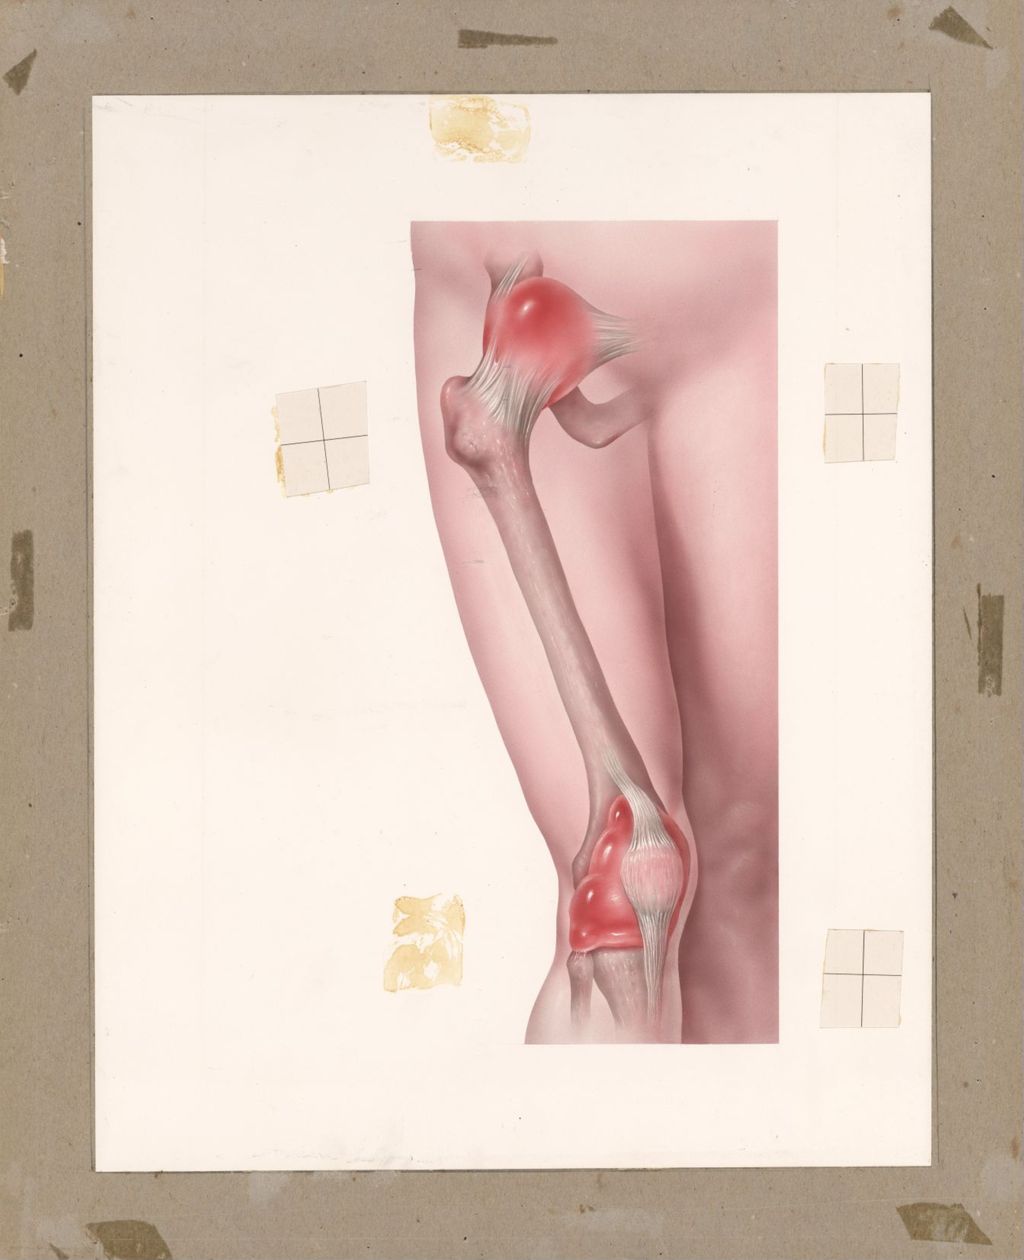 Miniature of Joint inflammation of hip and knee